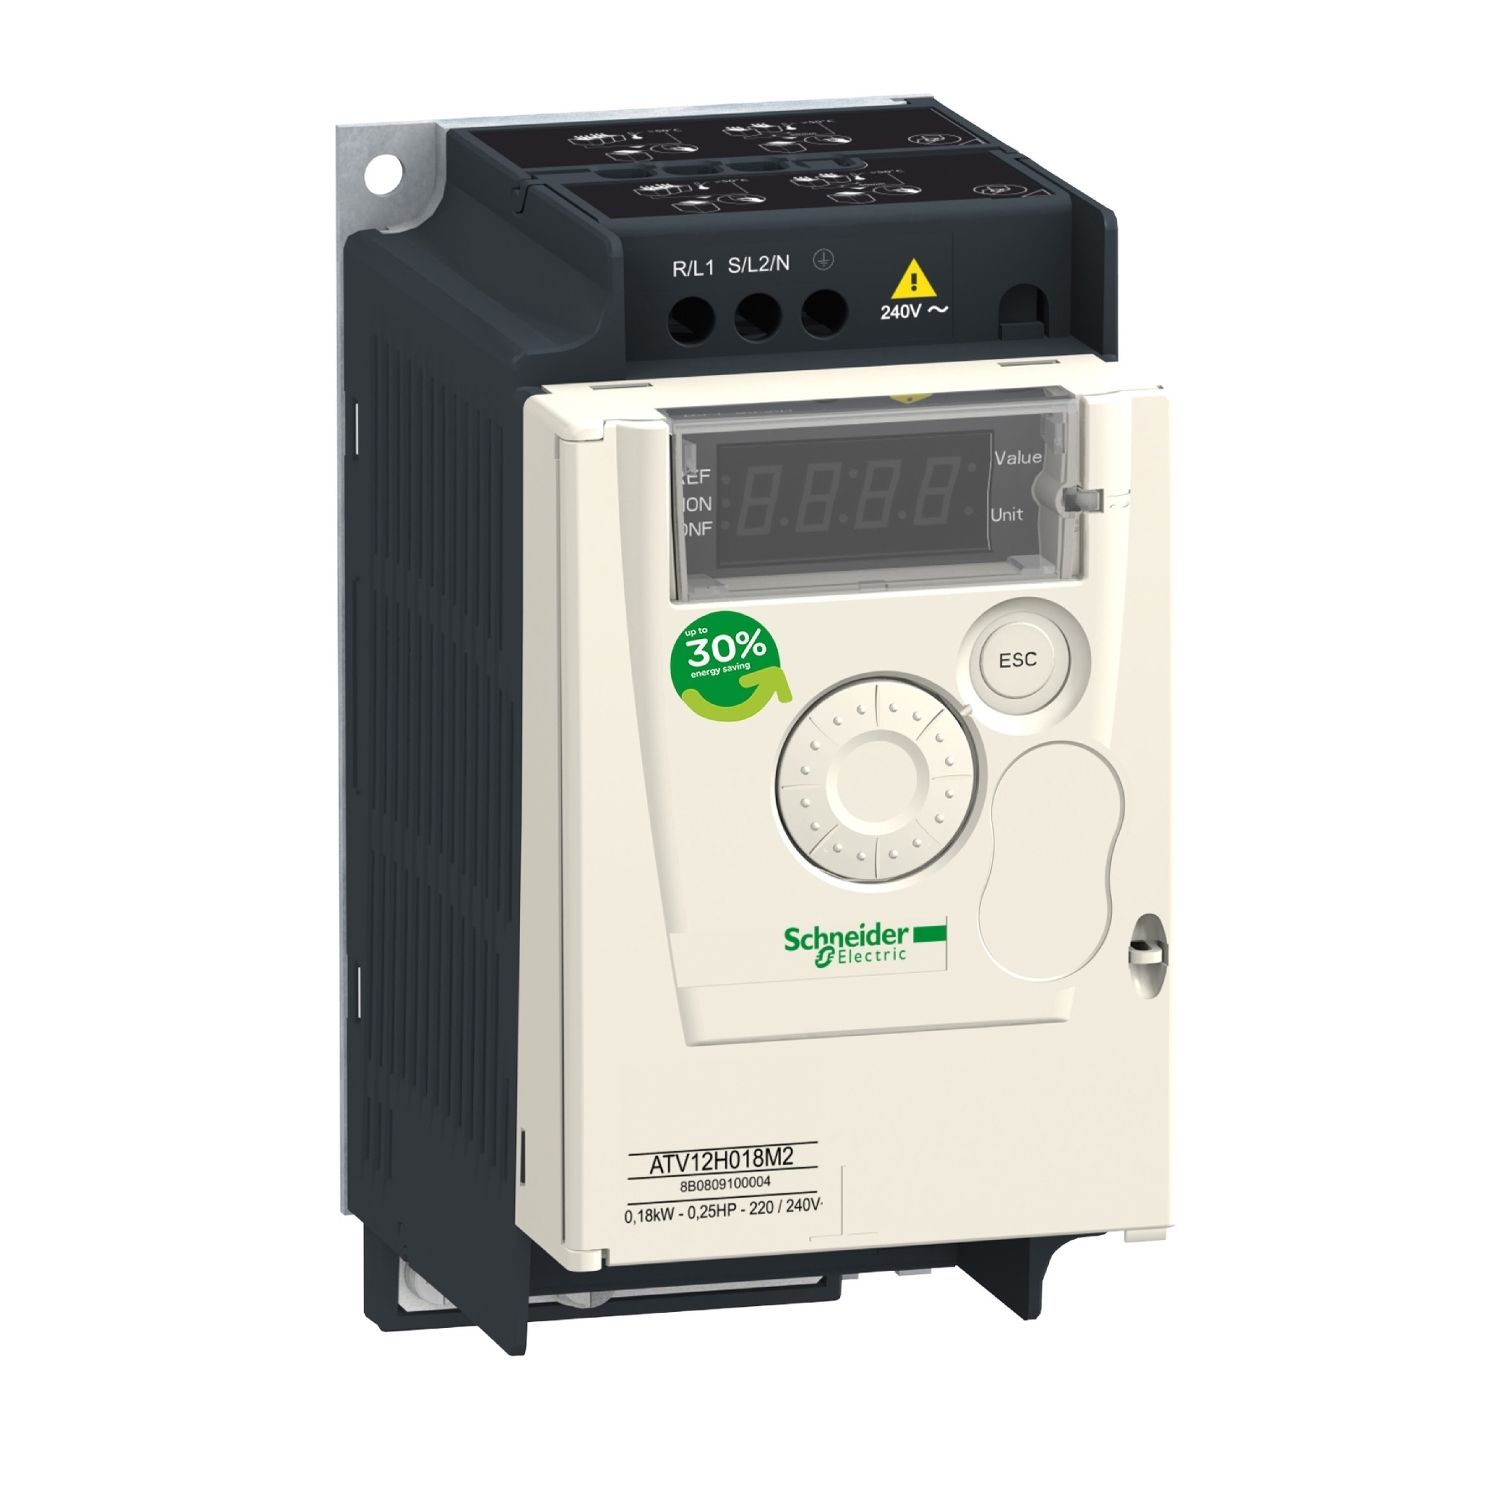 ATV12H037M2 variable speed drive, Altivar 12, 0.37kW, 0.55hp, 200 to 240V, 1 phase, with heat sink